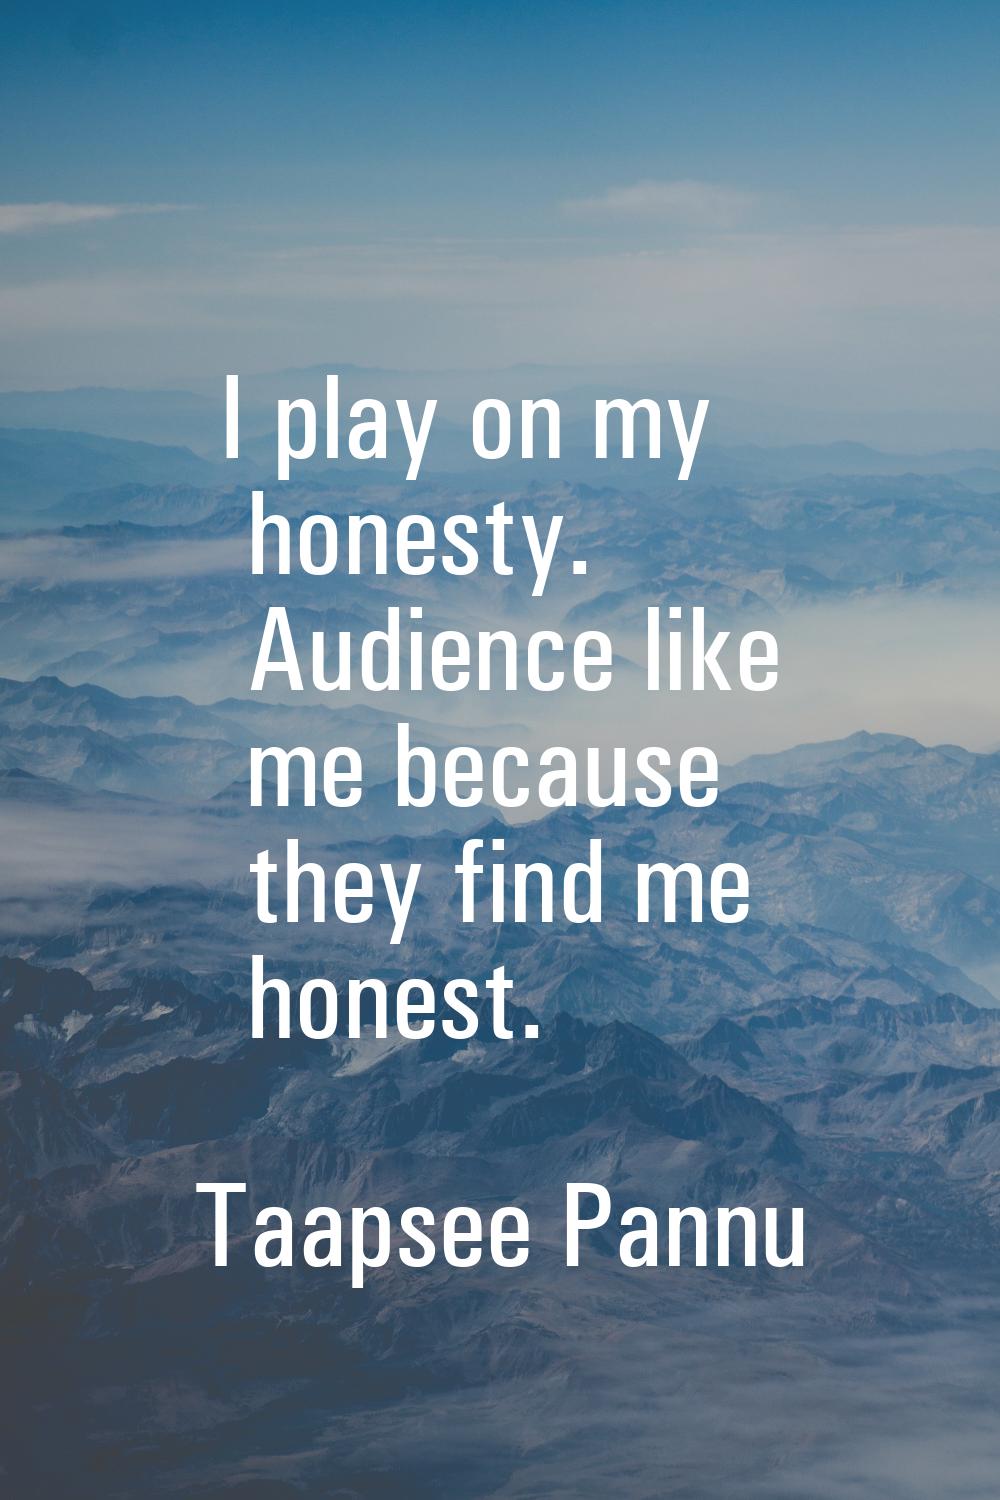 I play on my honesty. Audience like me because they find me honest.